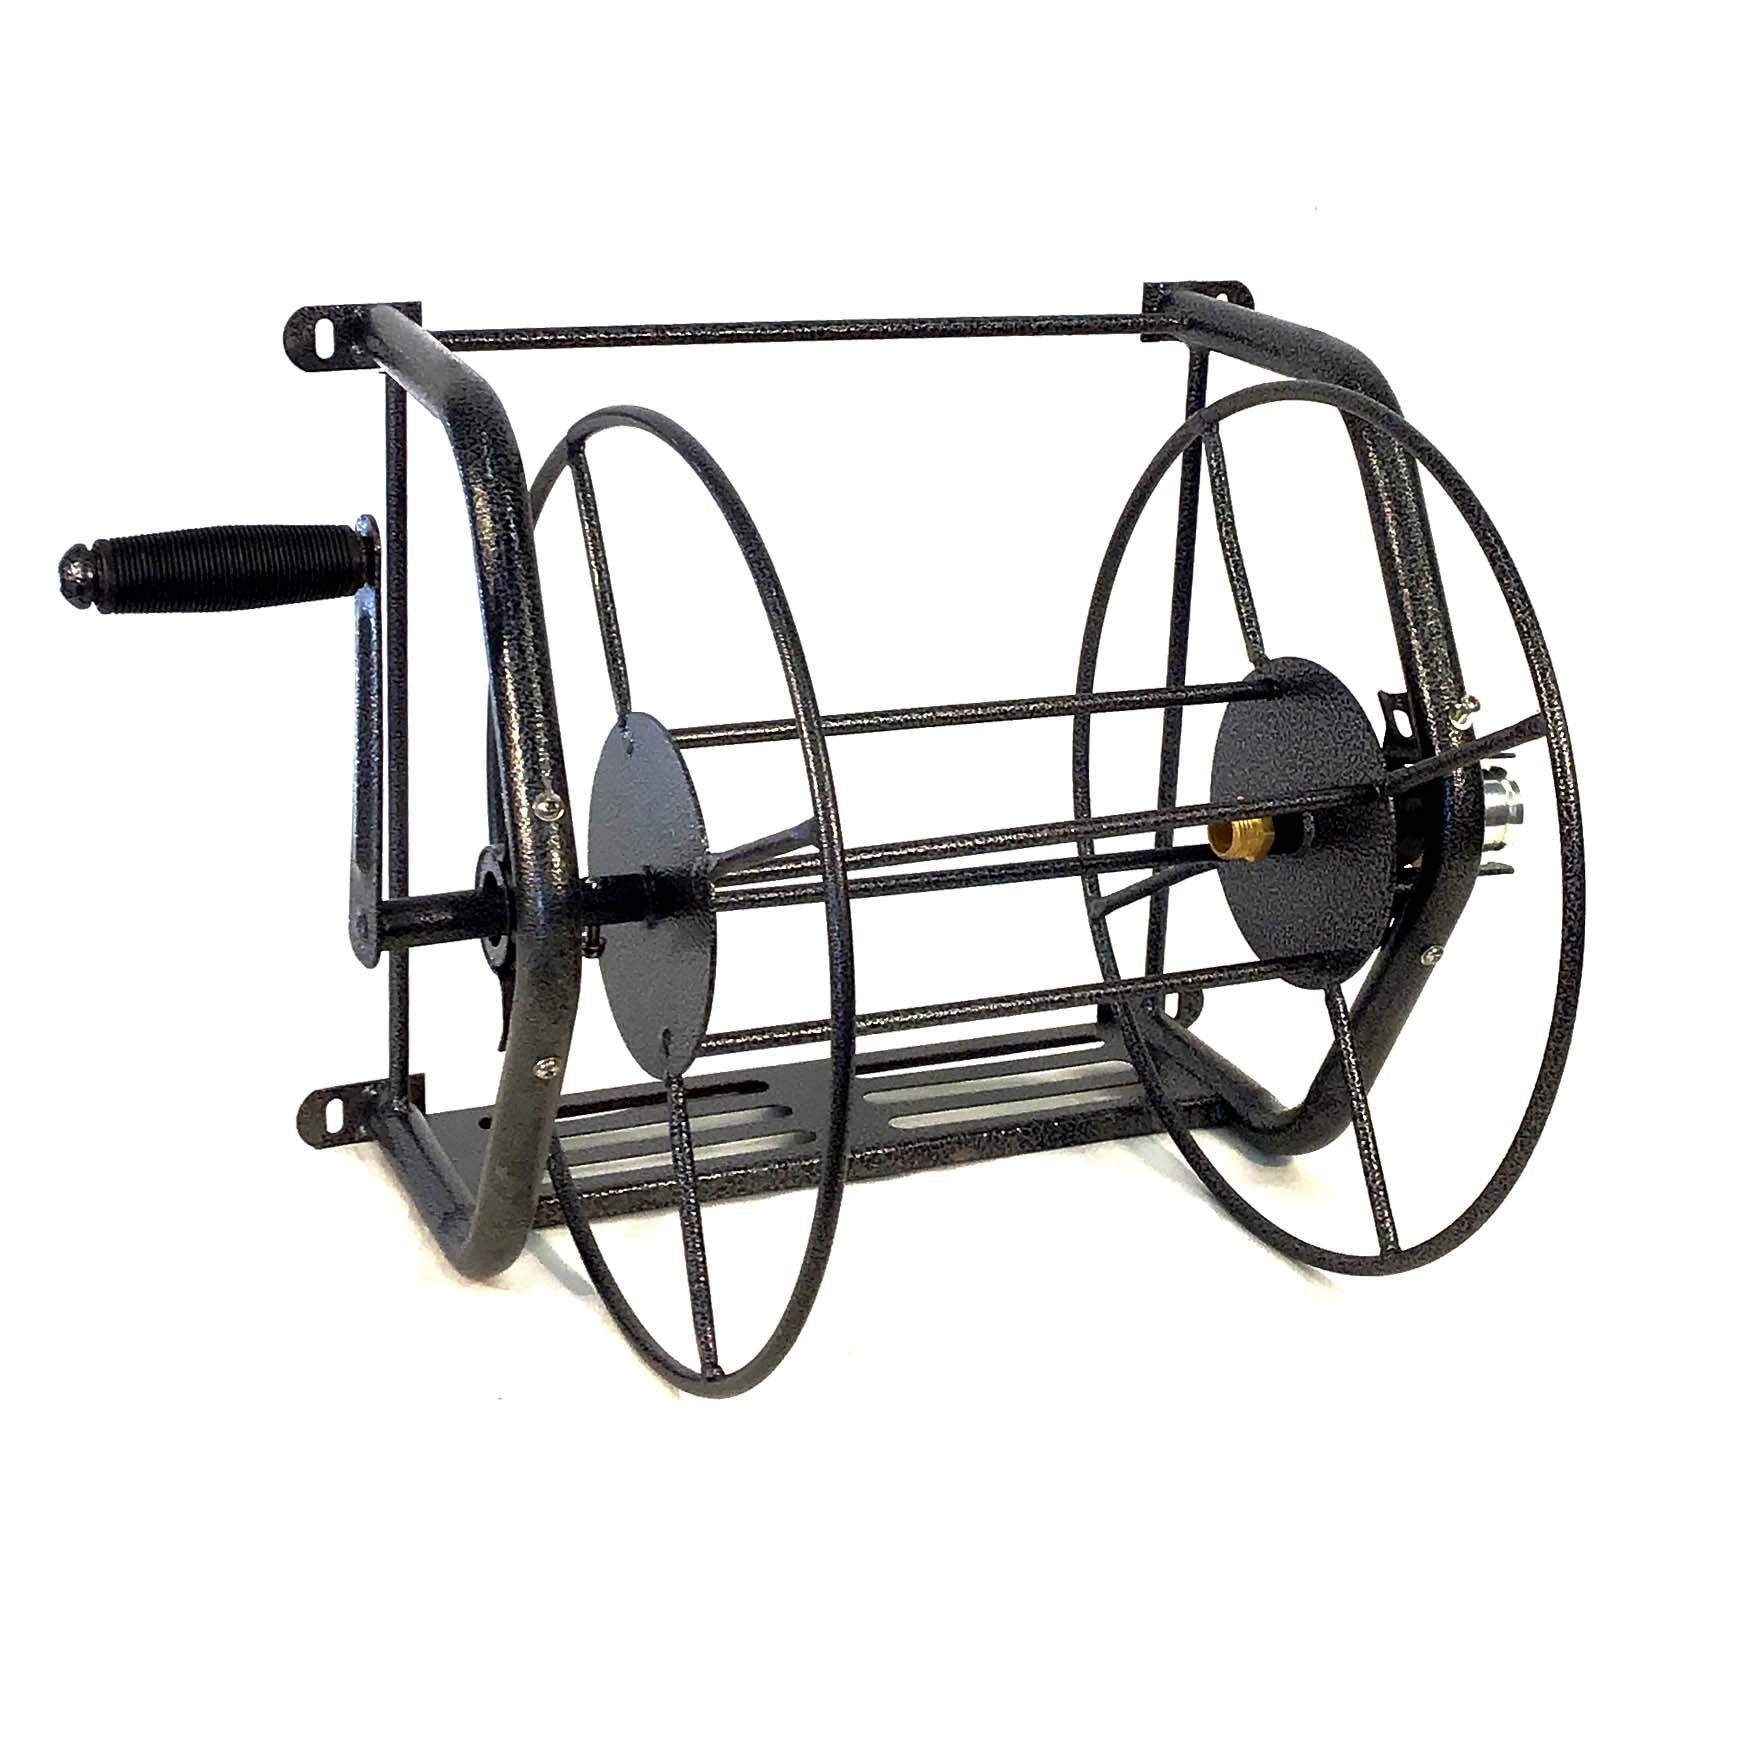 WATER HOSE REEL - 25M x 20MM (A FRAME) - Paramount Browns', Adelaide